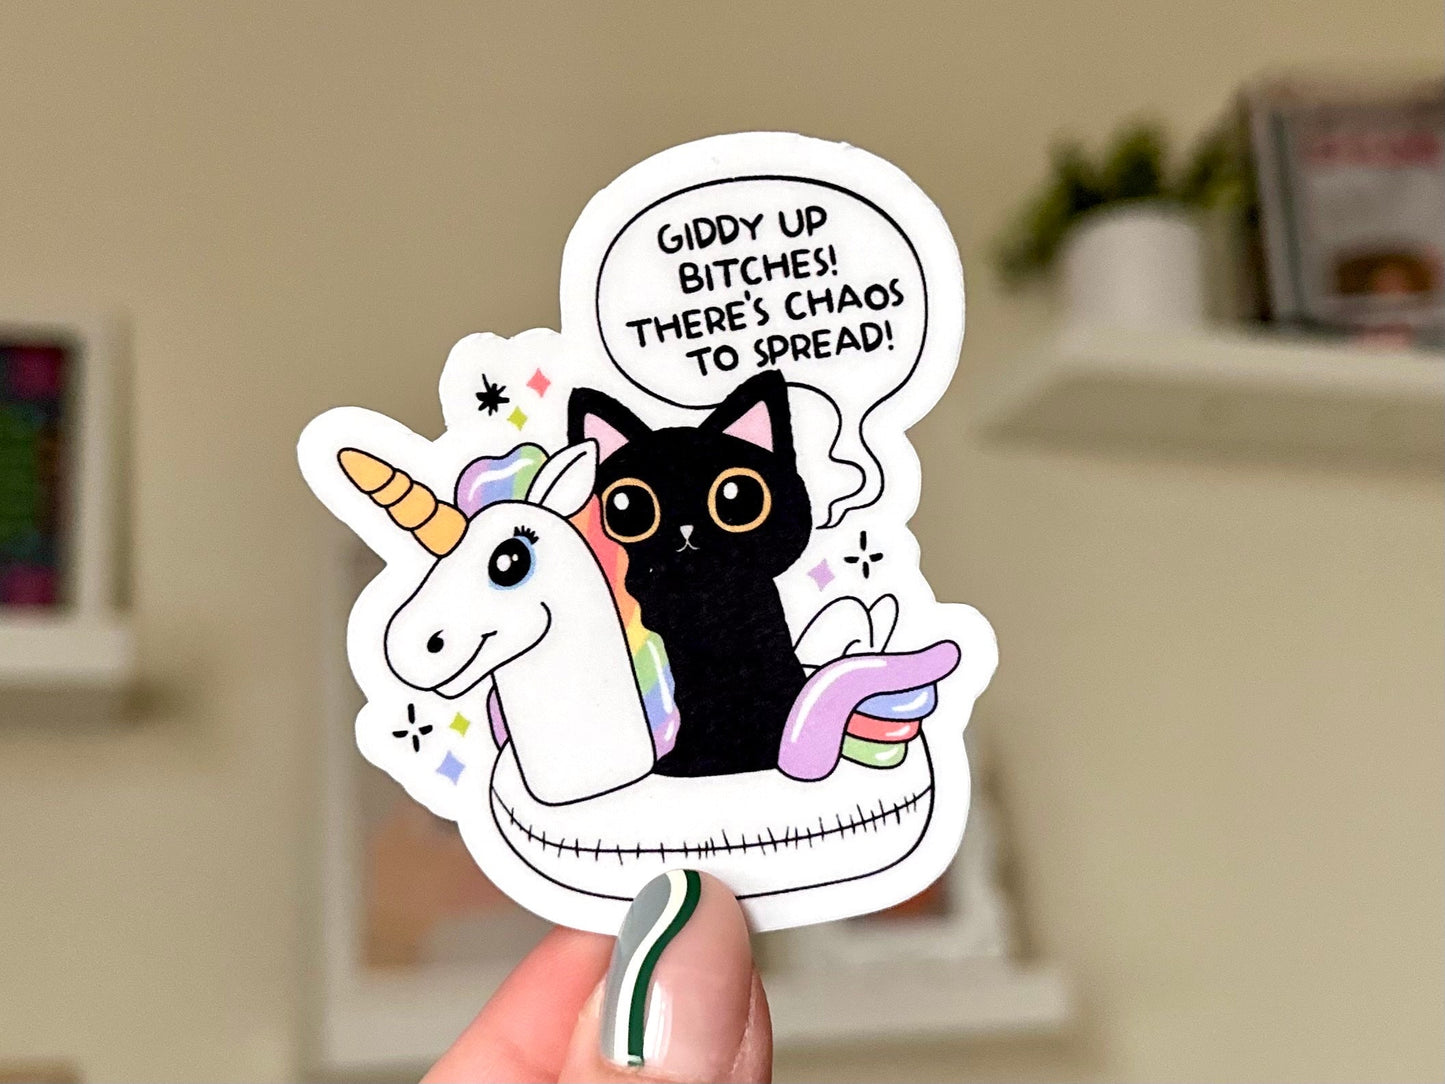 Giddy Up B!tches Waterproof Sticker, Mental Health Stickers, Gifts for Bestfriend, Handdrawn Art, Funny